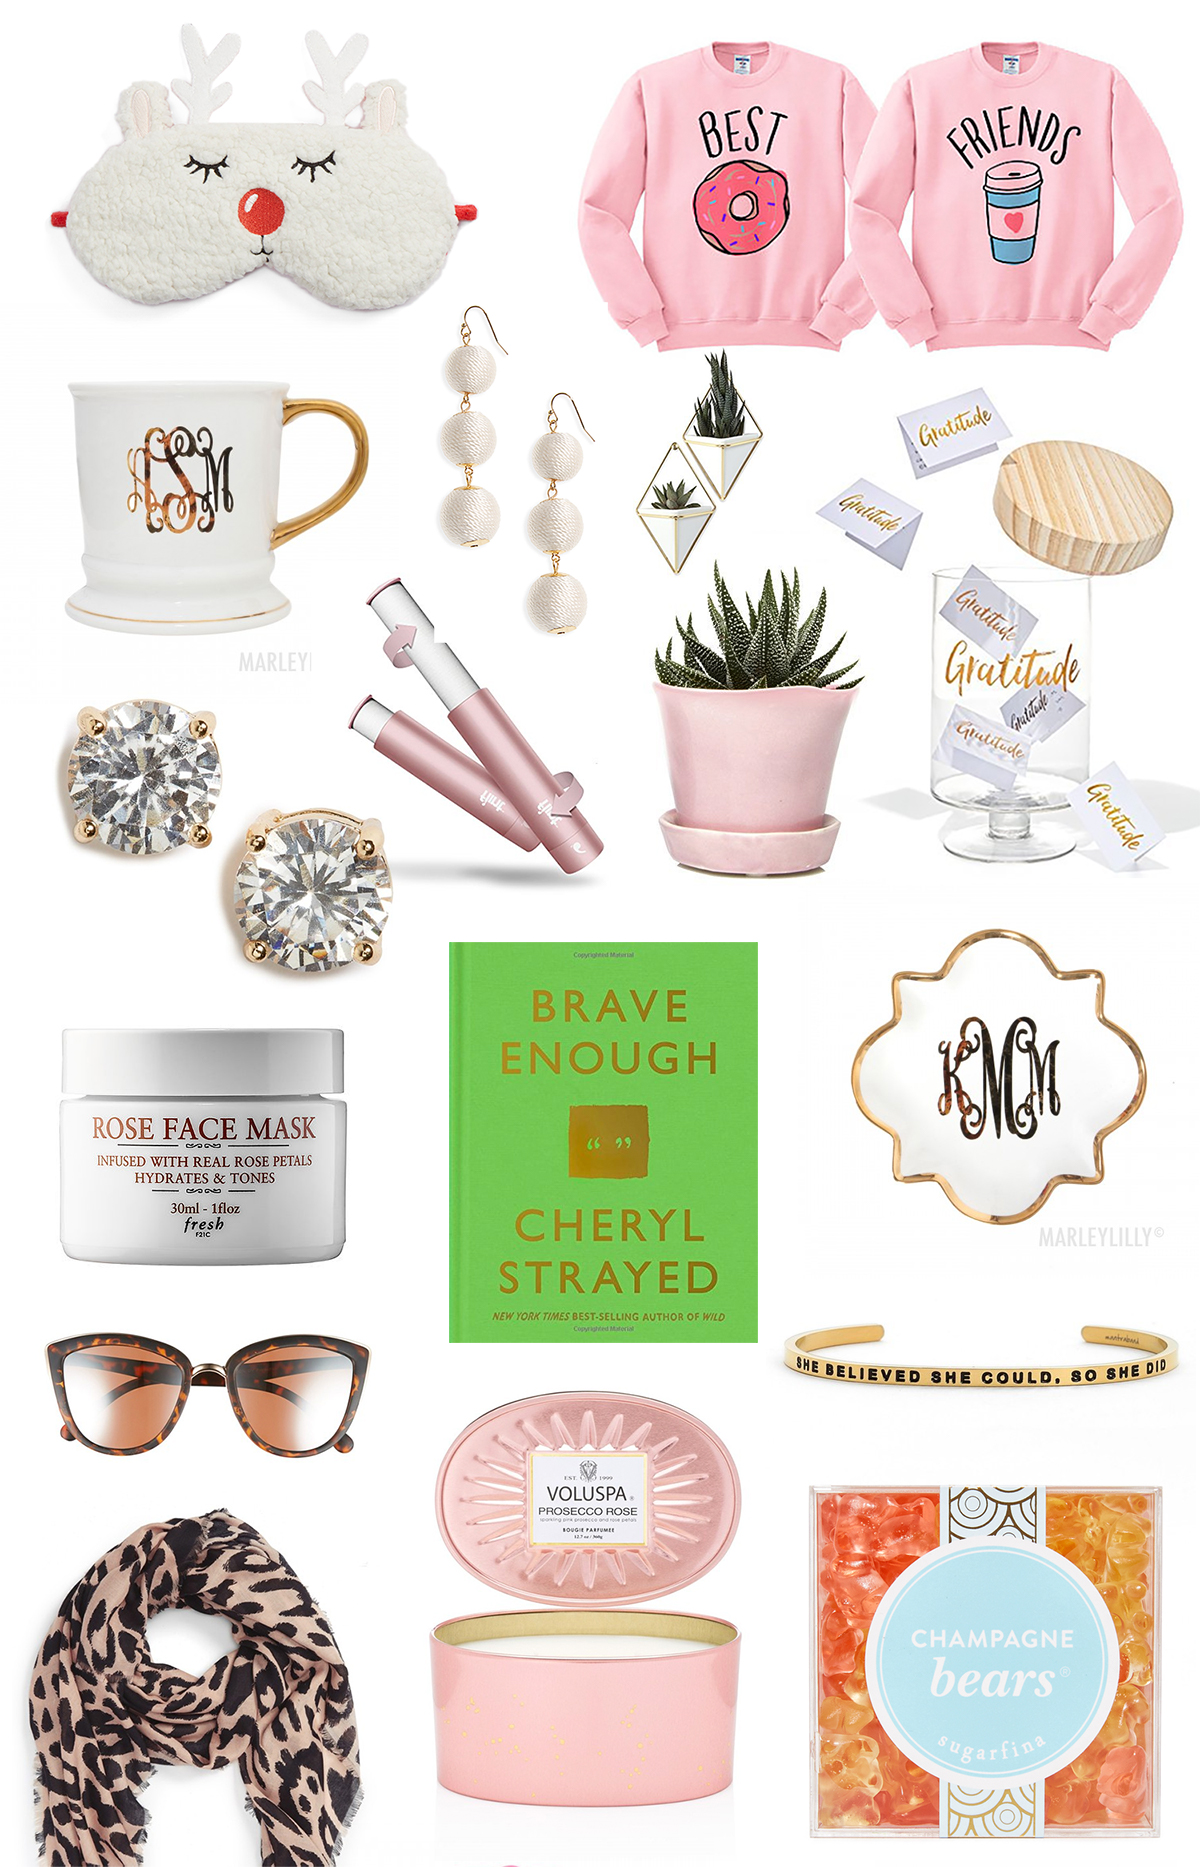 Gifts for Women under 25: 28 Affordable Christmas Gift Ideas for Her